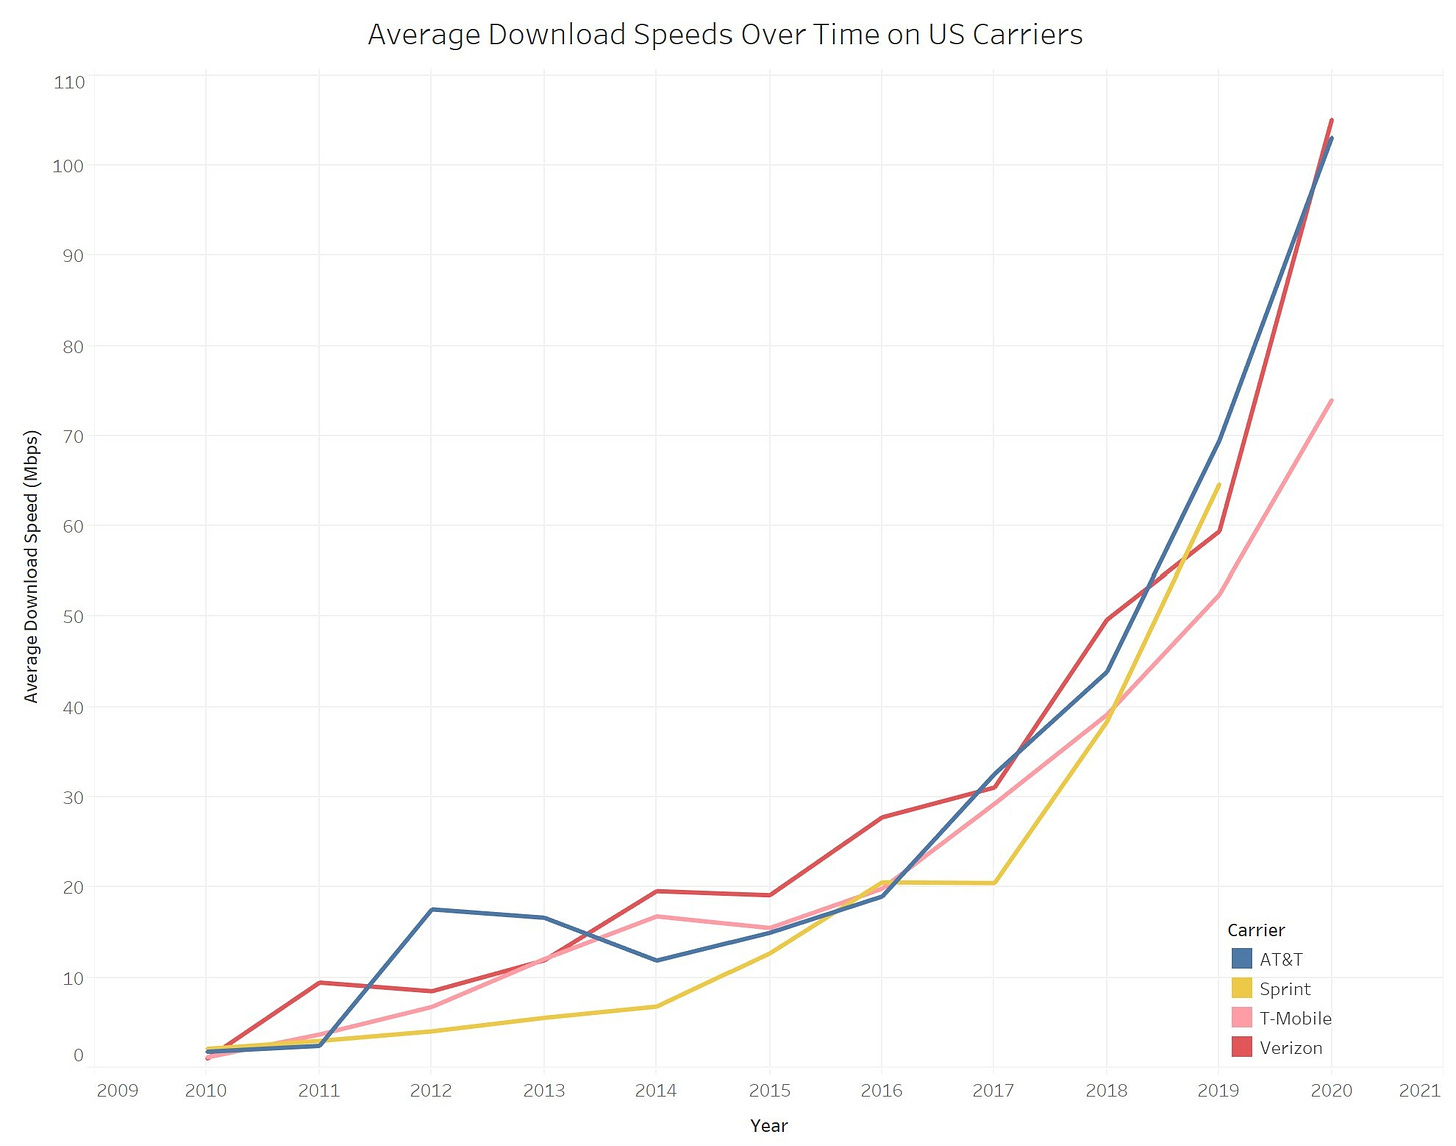 Download speeds by major carriers over 10 years